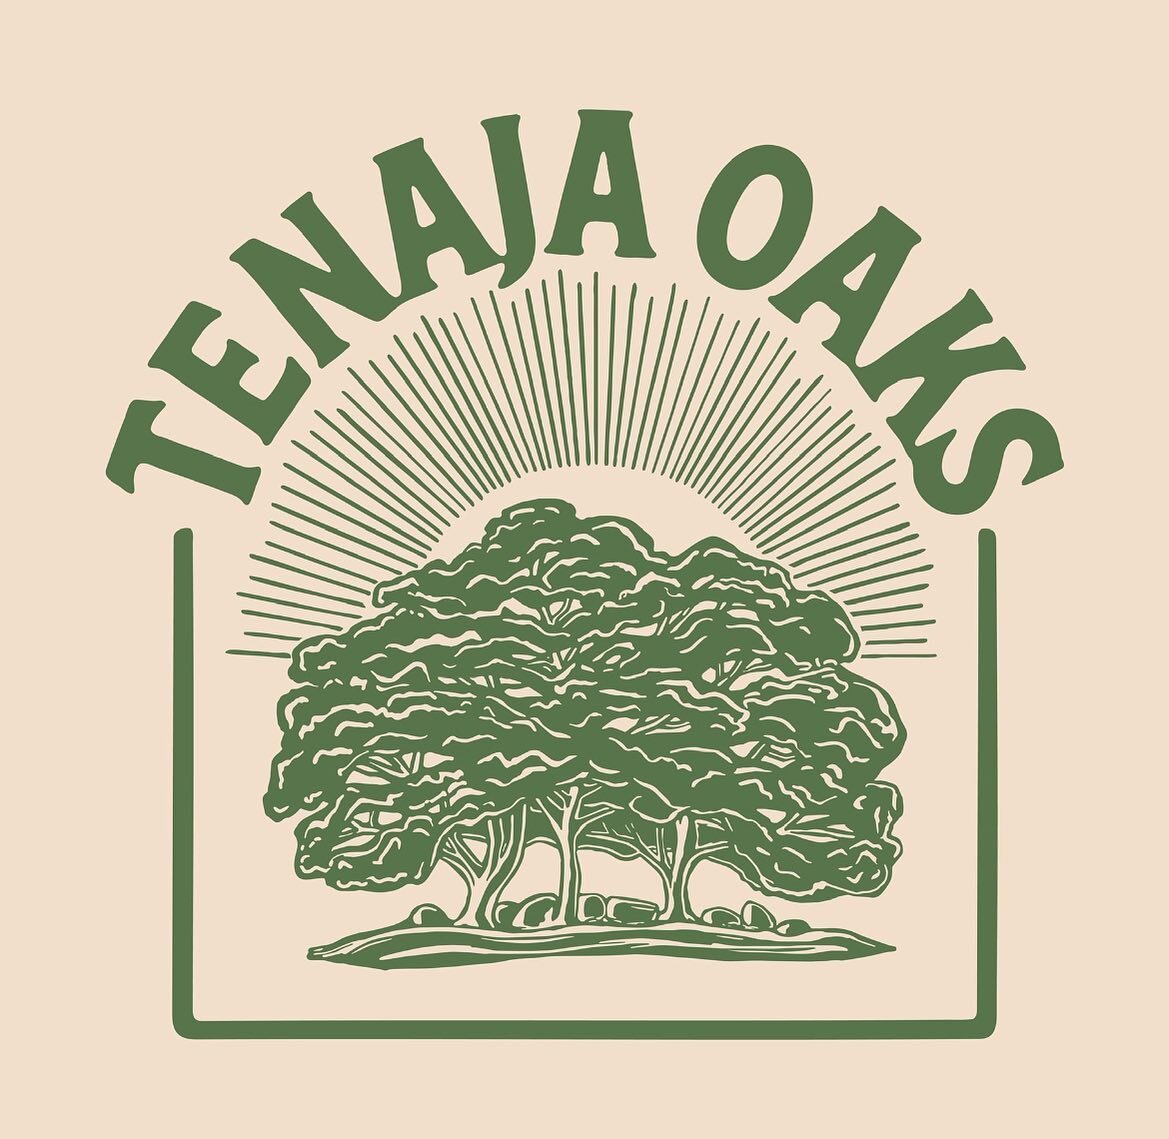 Super happy with how this new logo for Tenaja Oaks turned out.